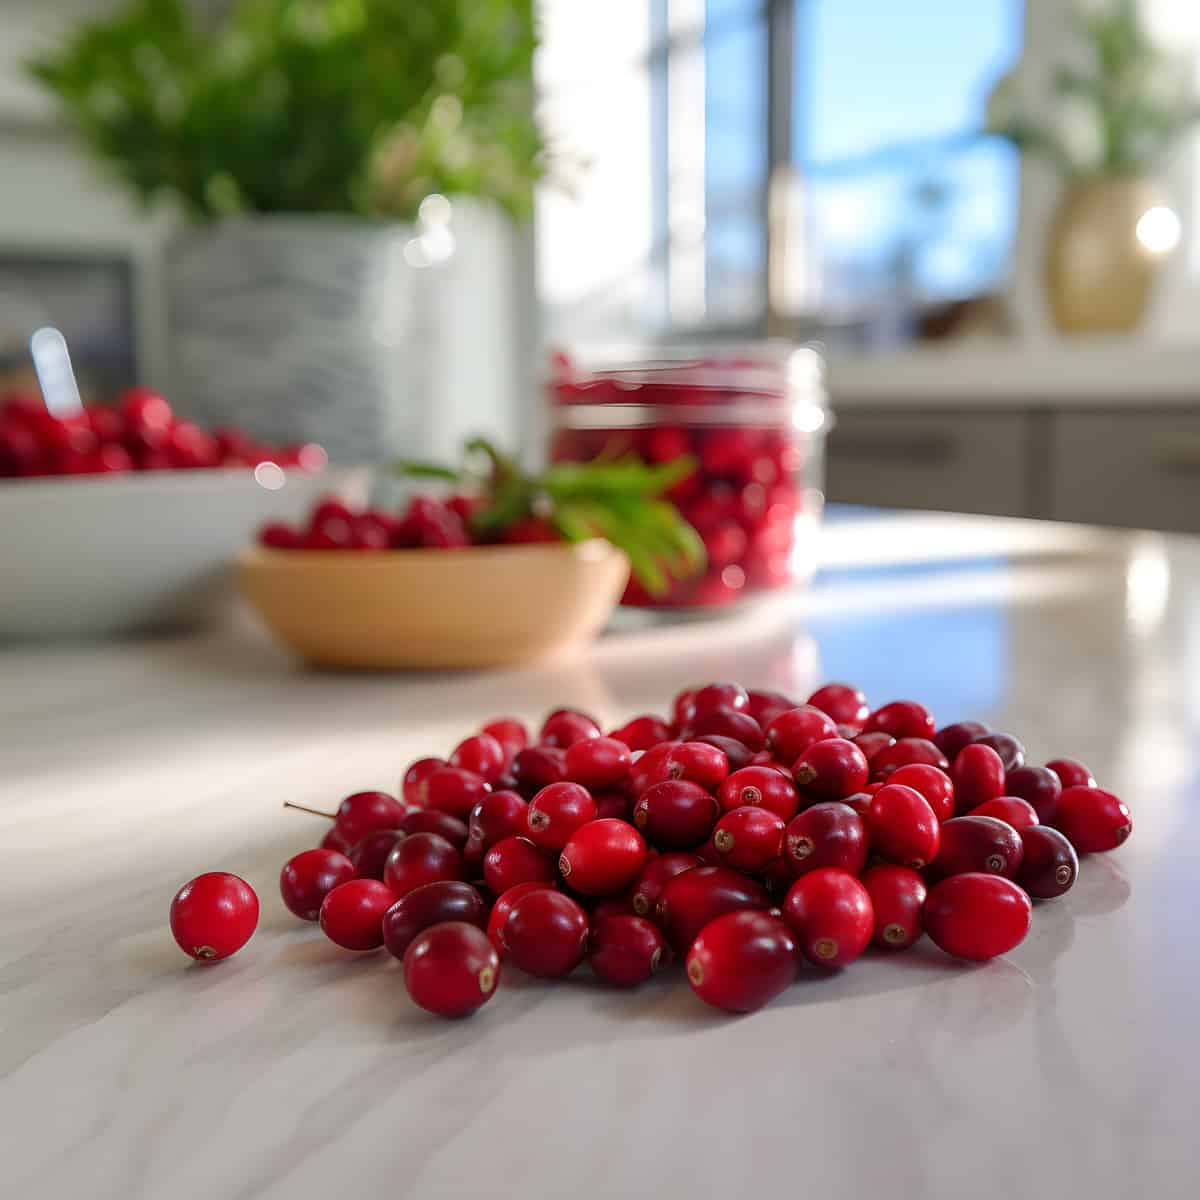 Cranberries on a kitchen counter